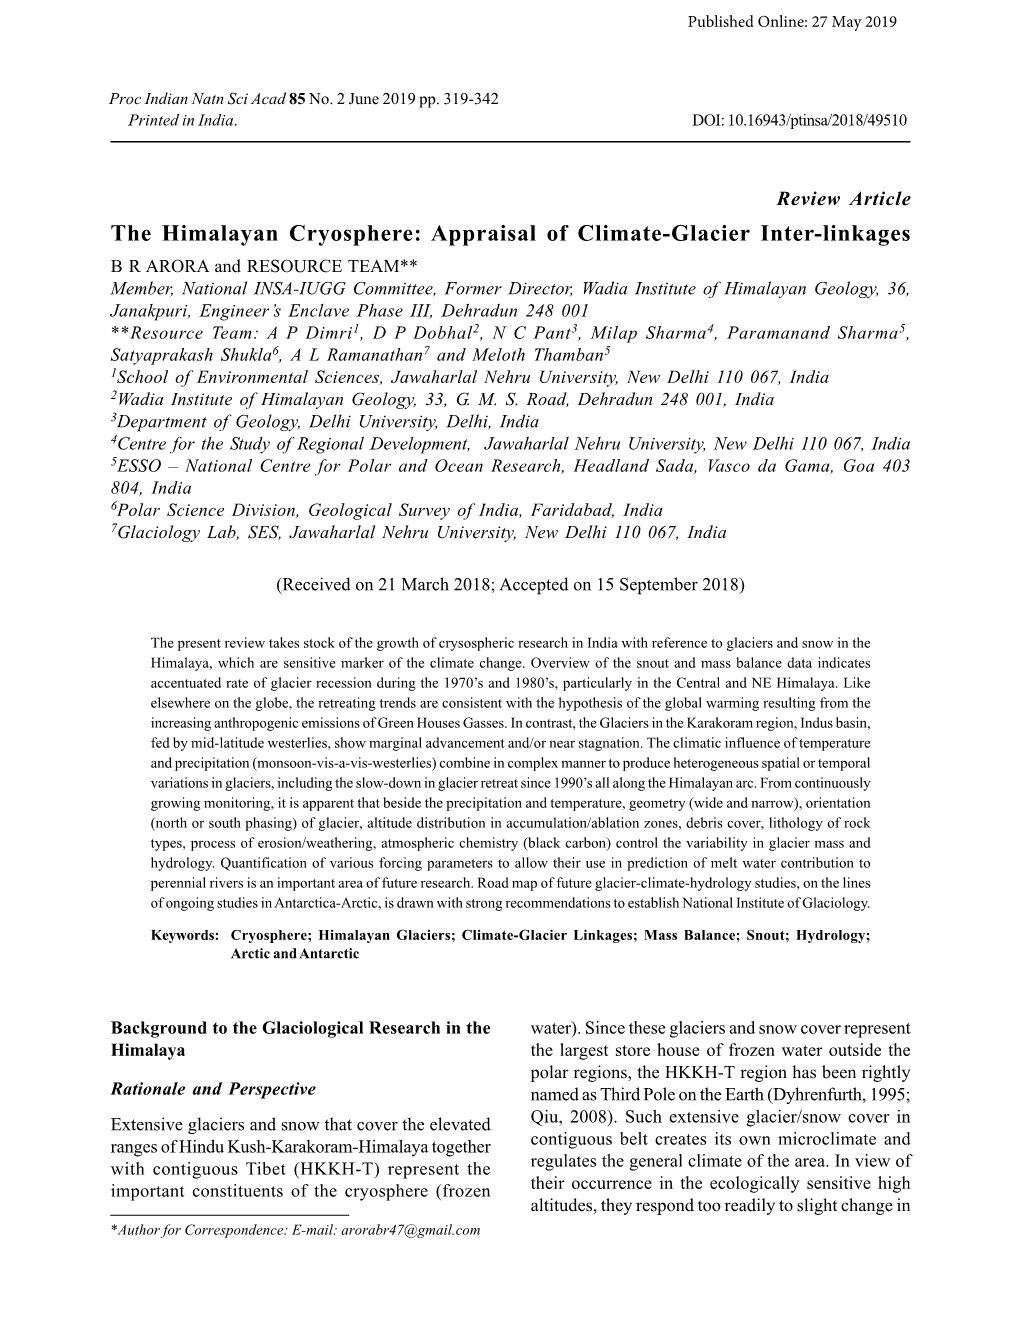 The Himalayan Cryosphere: Appraisal of Climate-Glacier Inter-Linkages